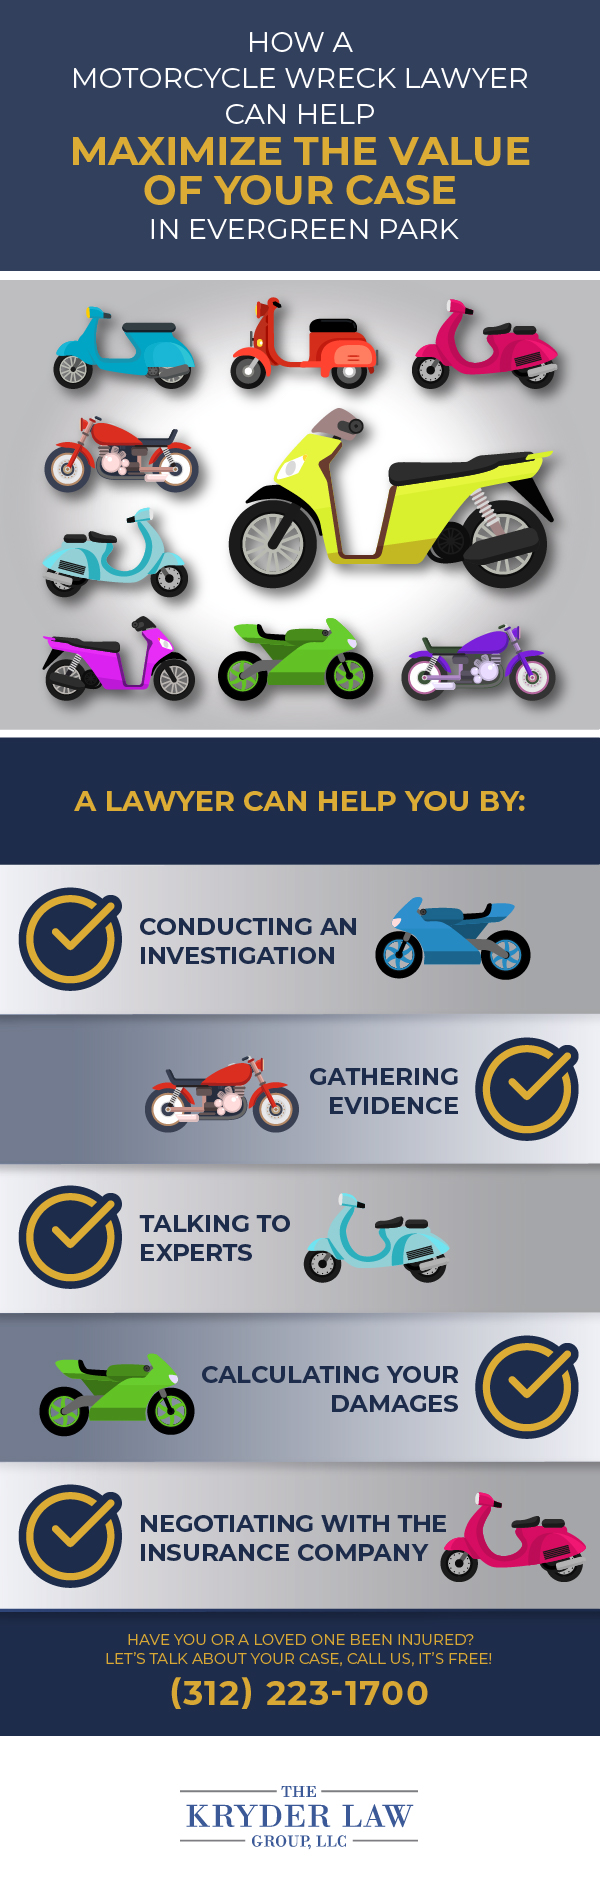 How a Motorcycle Wreck Lawyer Can Help Maximize the Value of Your Case in Evergreen Park